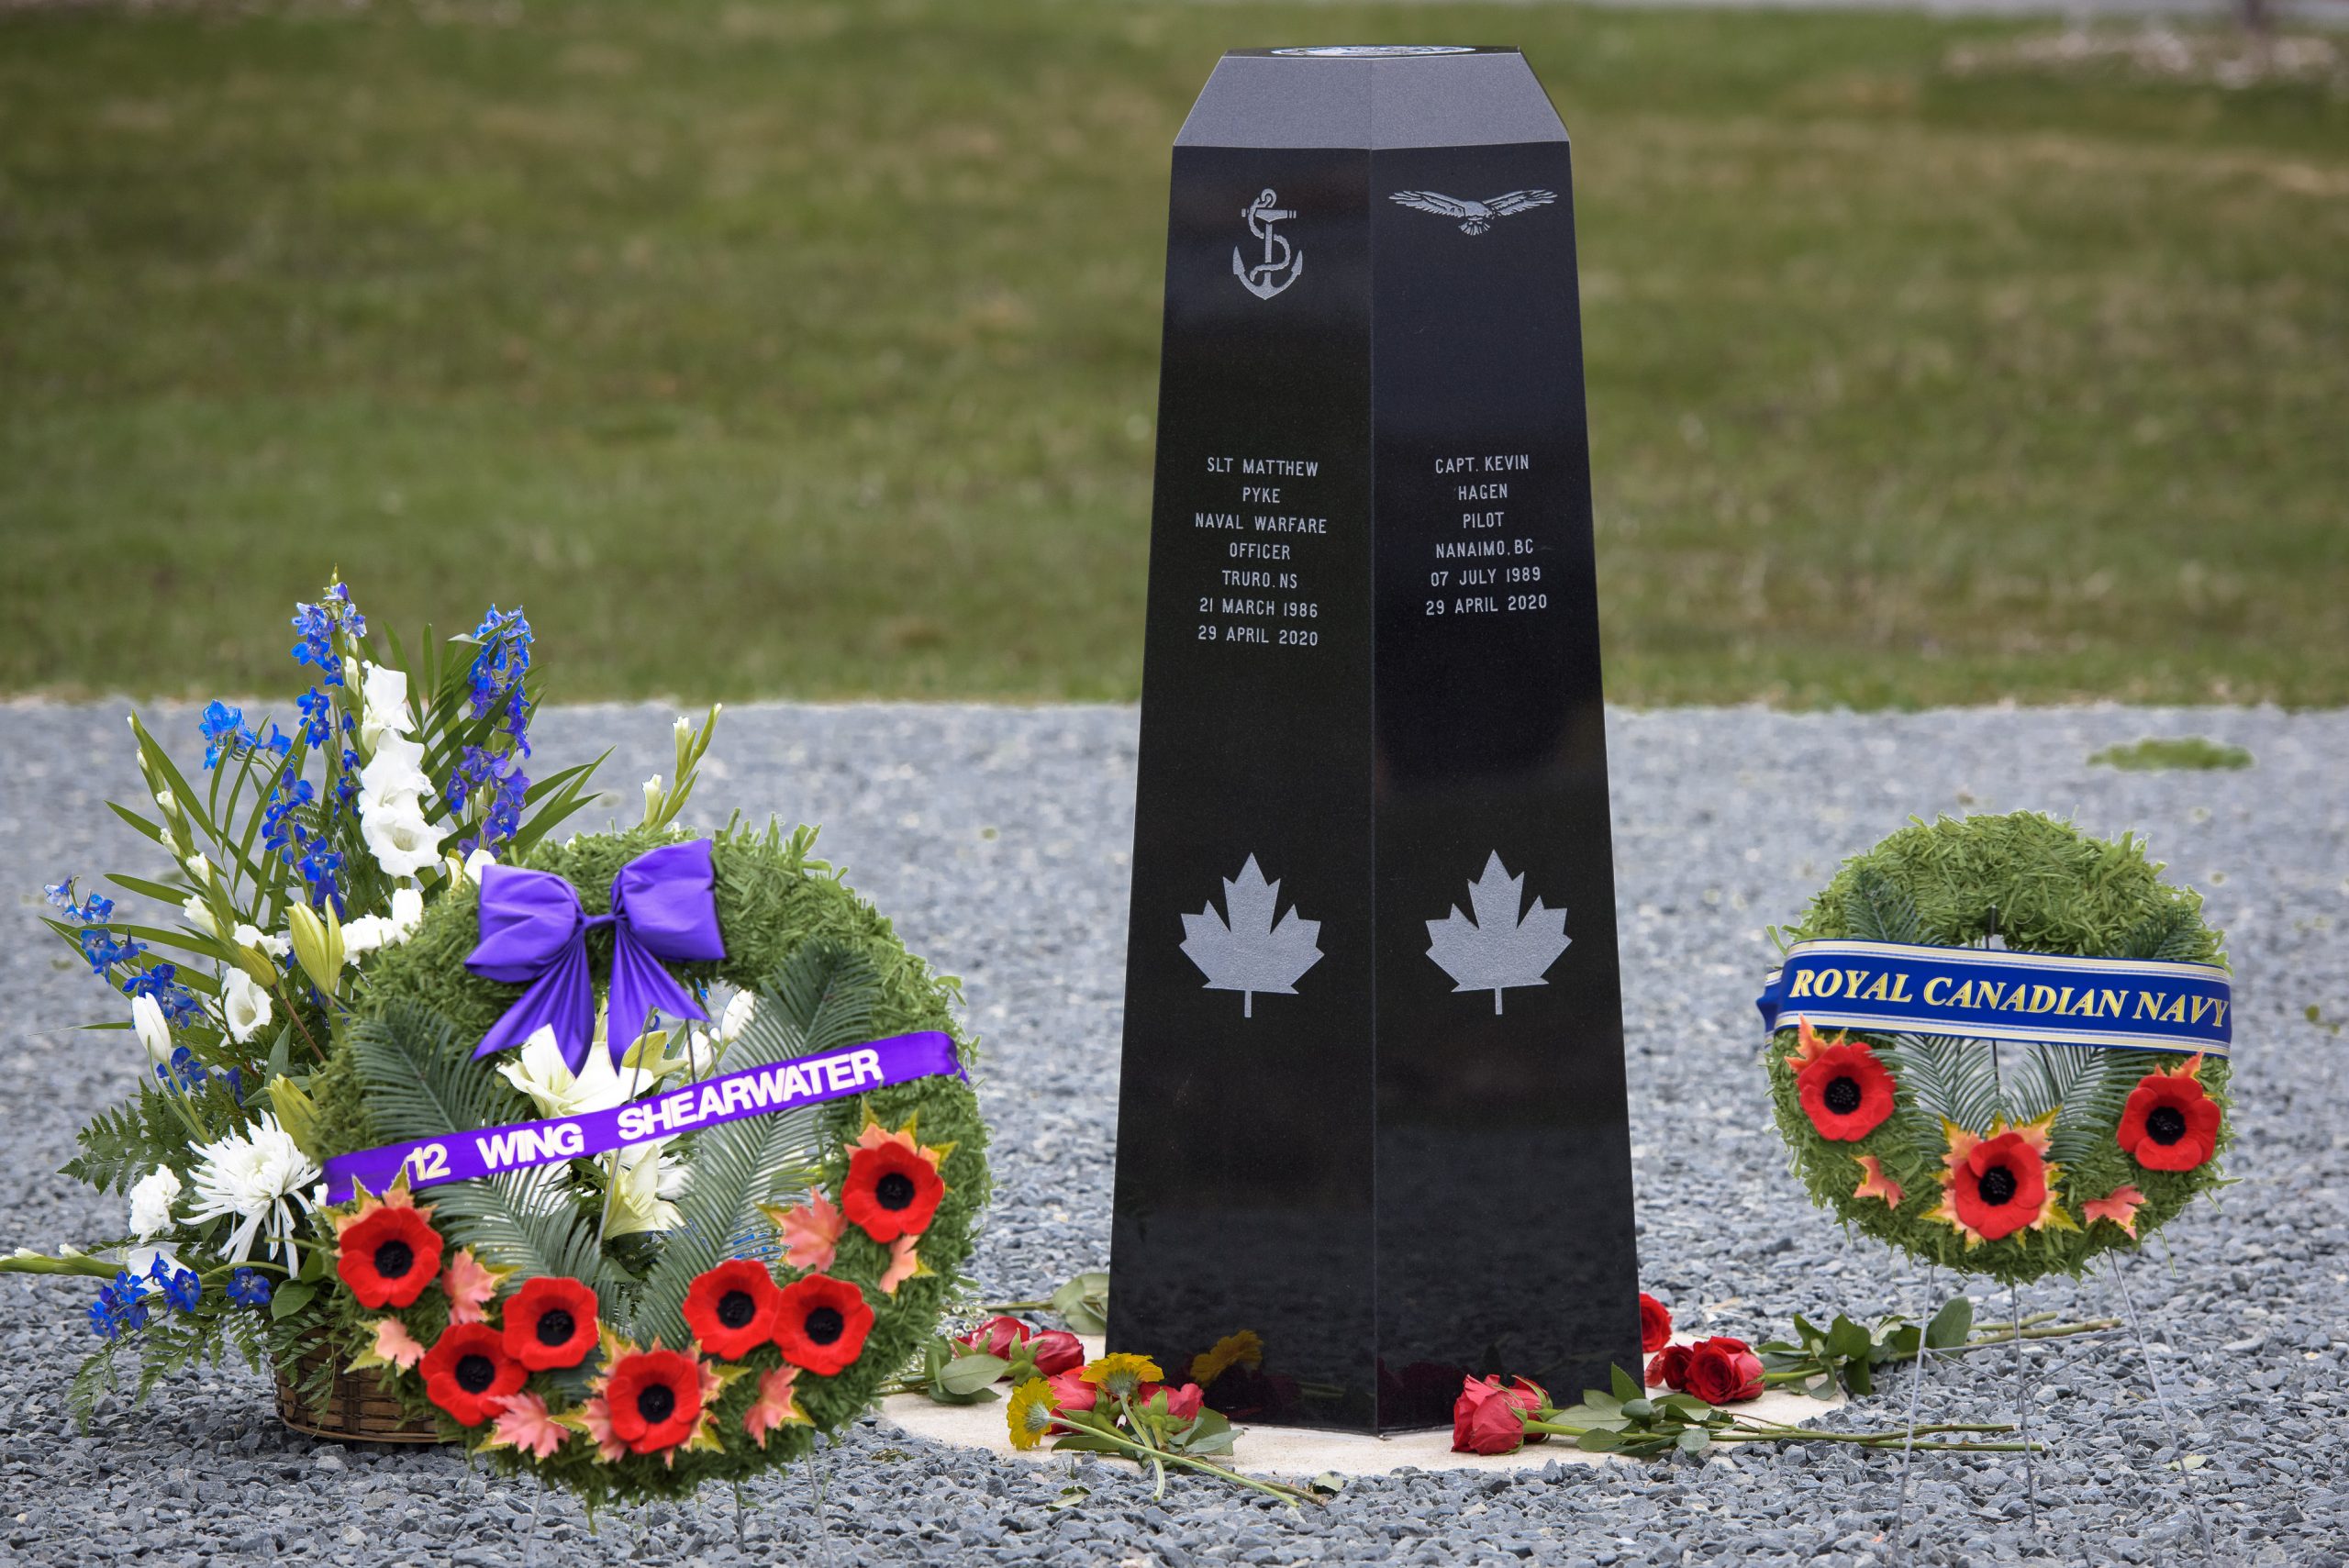 RCAF, RCN mark two years since Stalker 22 tragedy